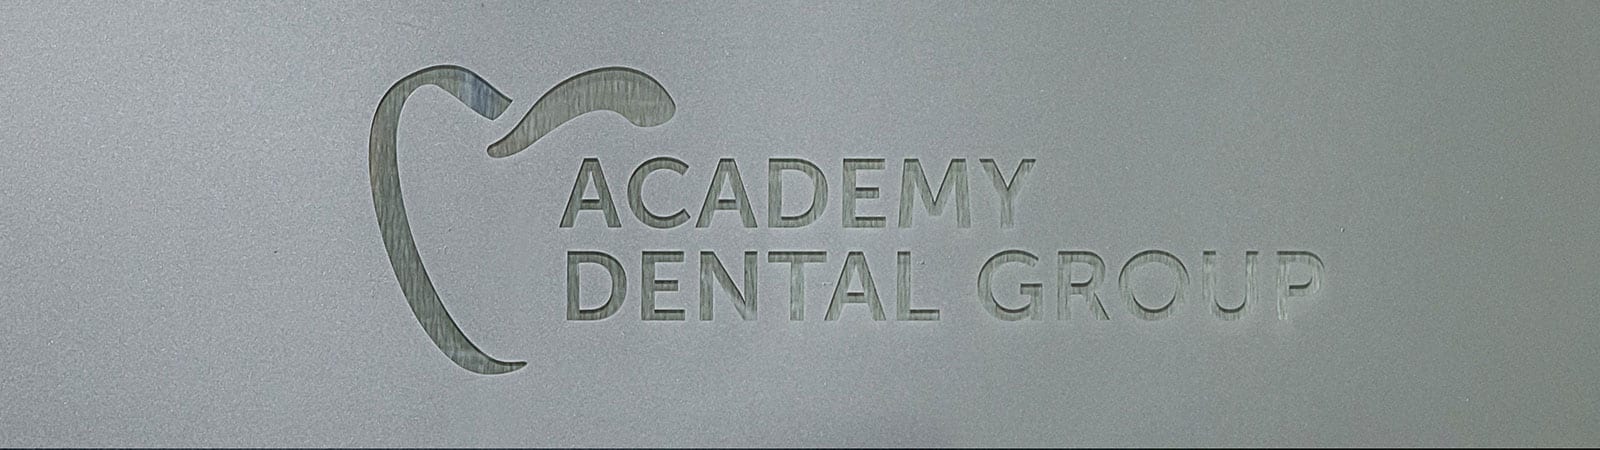 Thank you for your message | Academy Dental Group